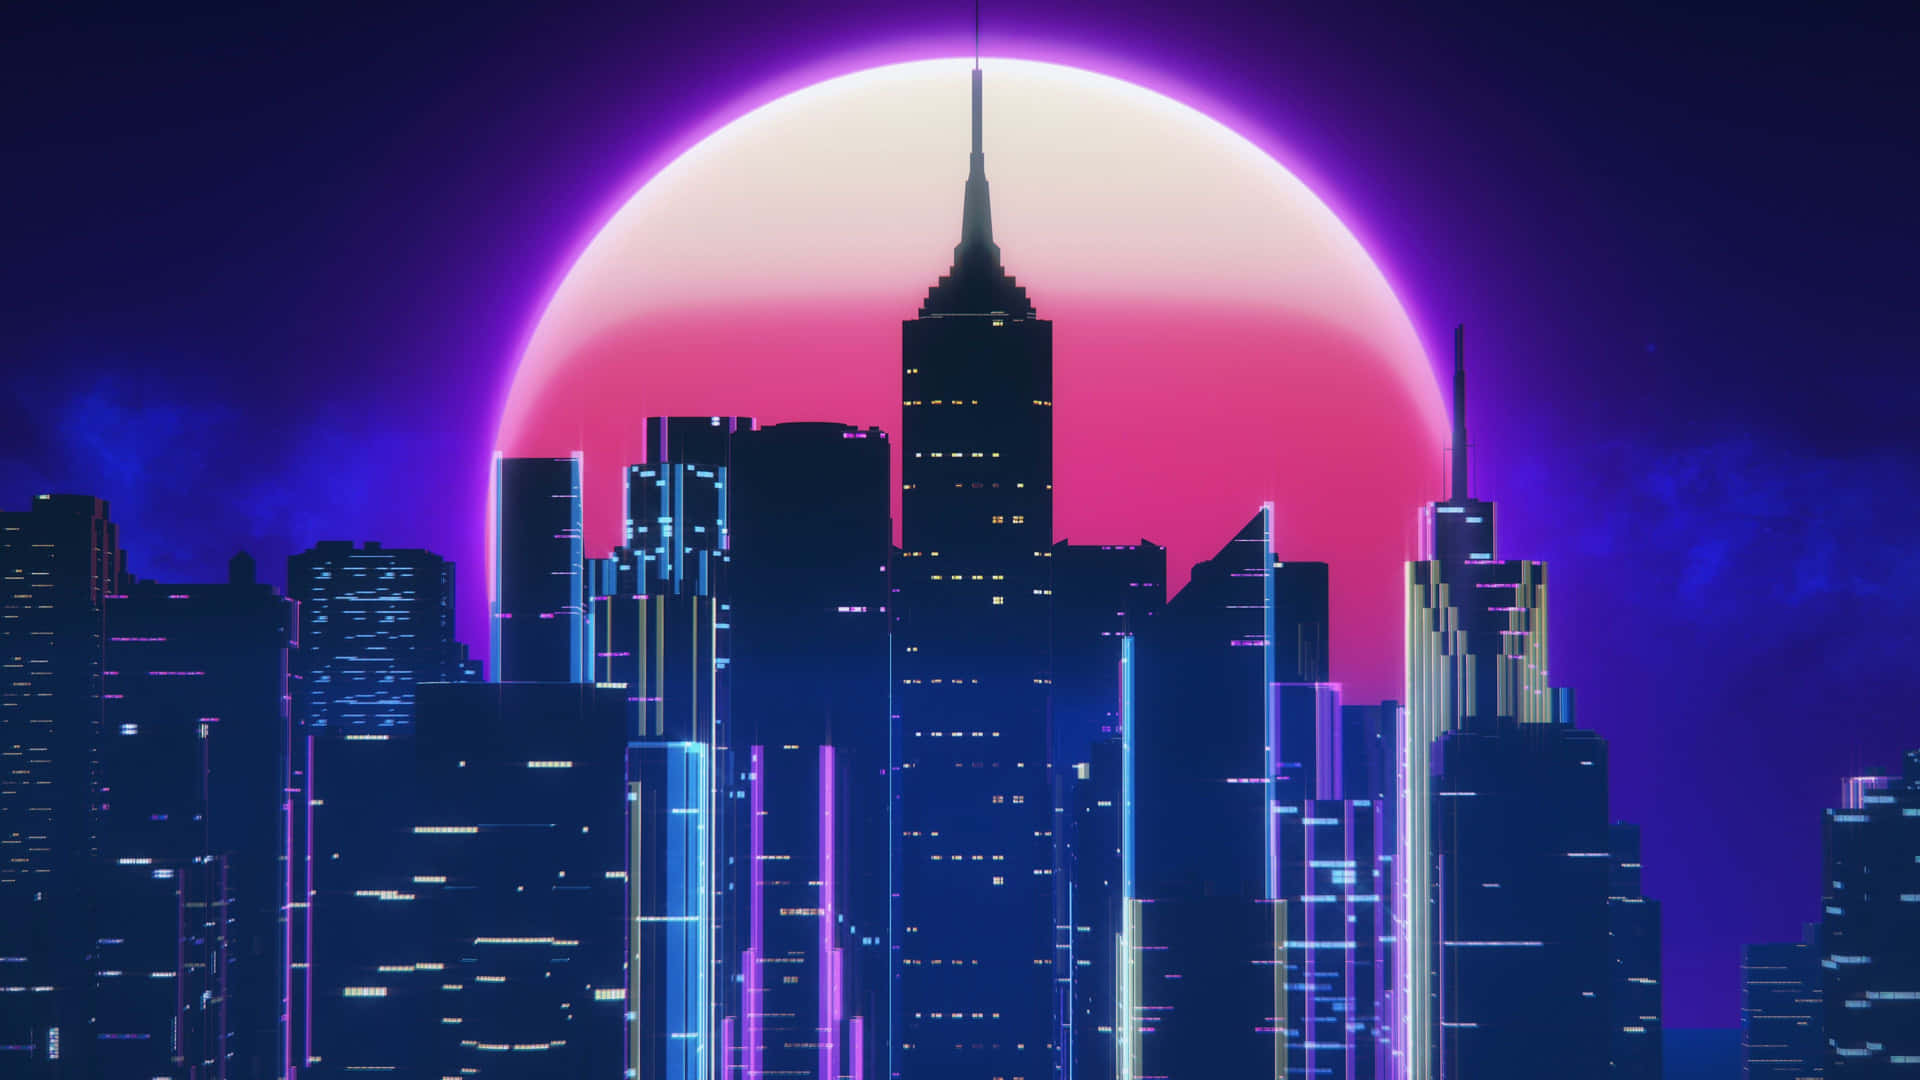 Enhance your aesthetic with this gorgeous Synthwave background